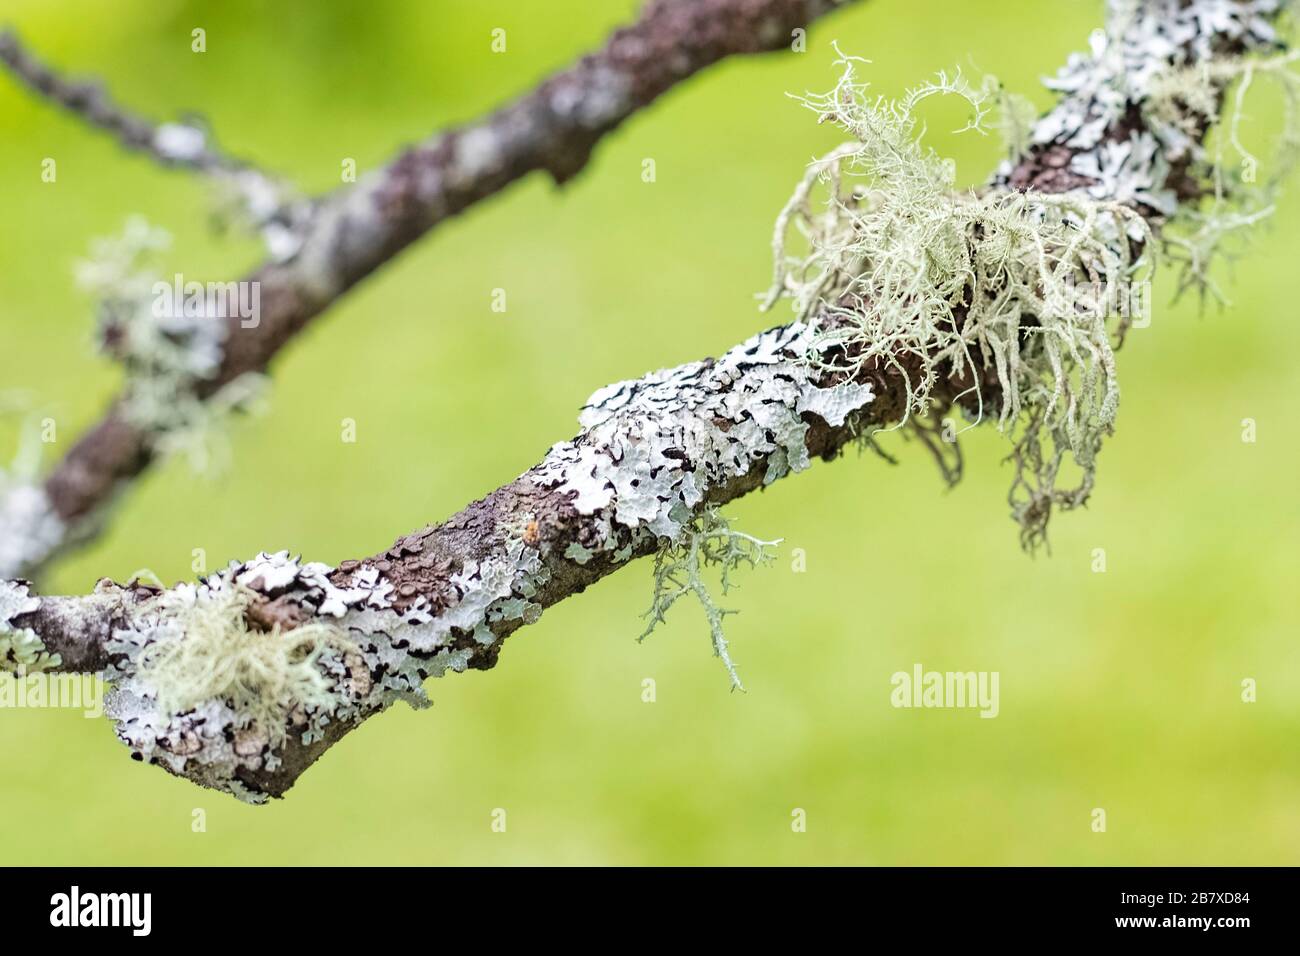 Lichen Parmelia on a tree branch. grows on birch. Copy space Stock Photo